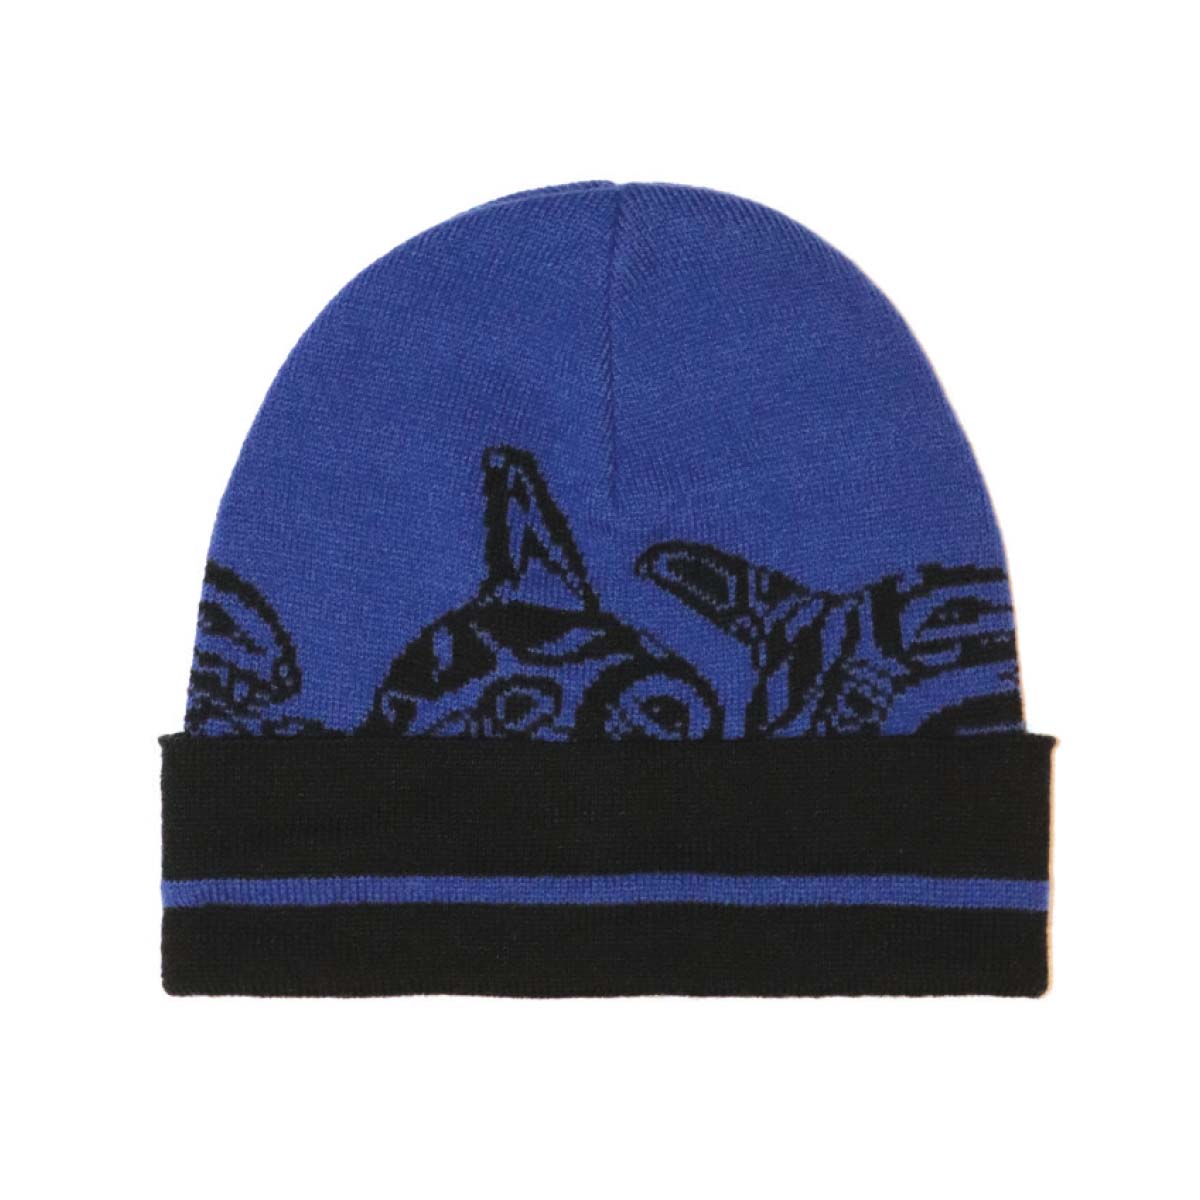 Toque Orca Family - Toque Orca Family -  - House of Himwitsa Native Art Gallery and Gifts